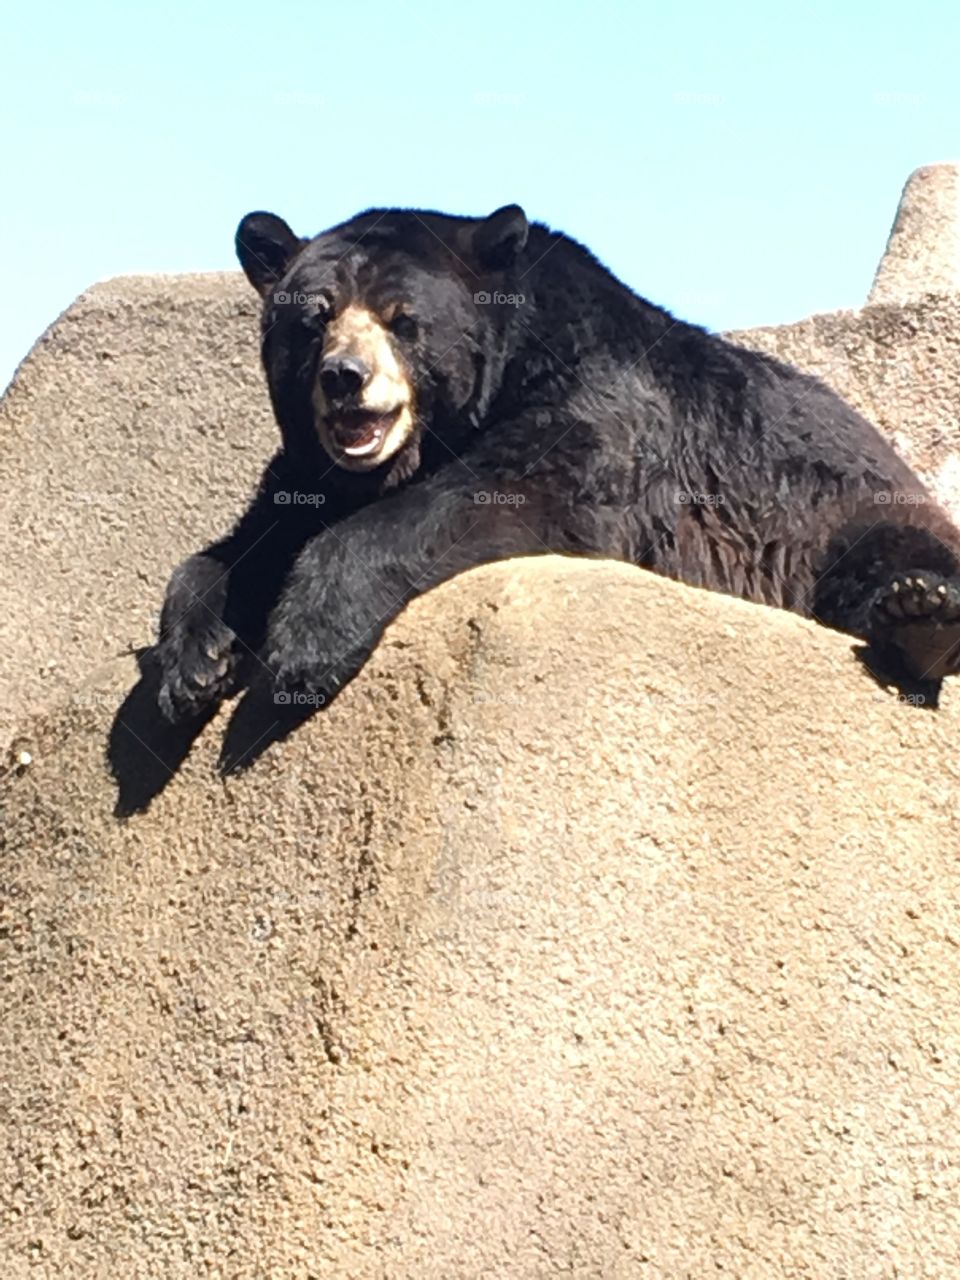 Papa bear chilling on a hot summer day